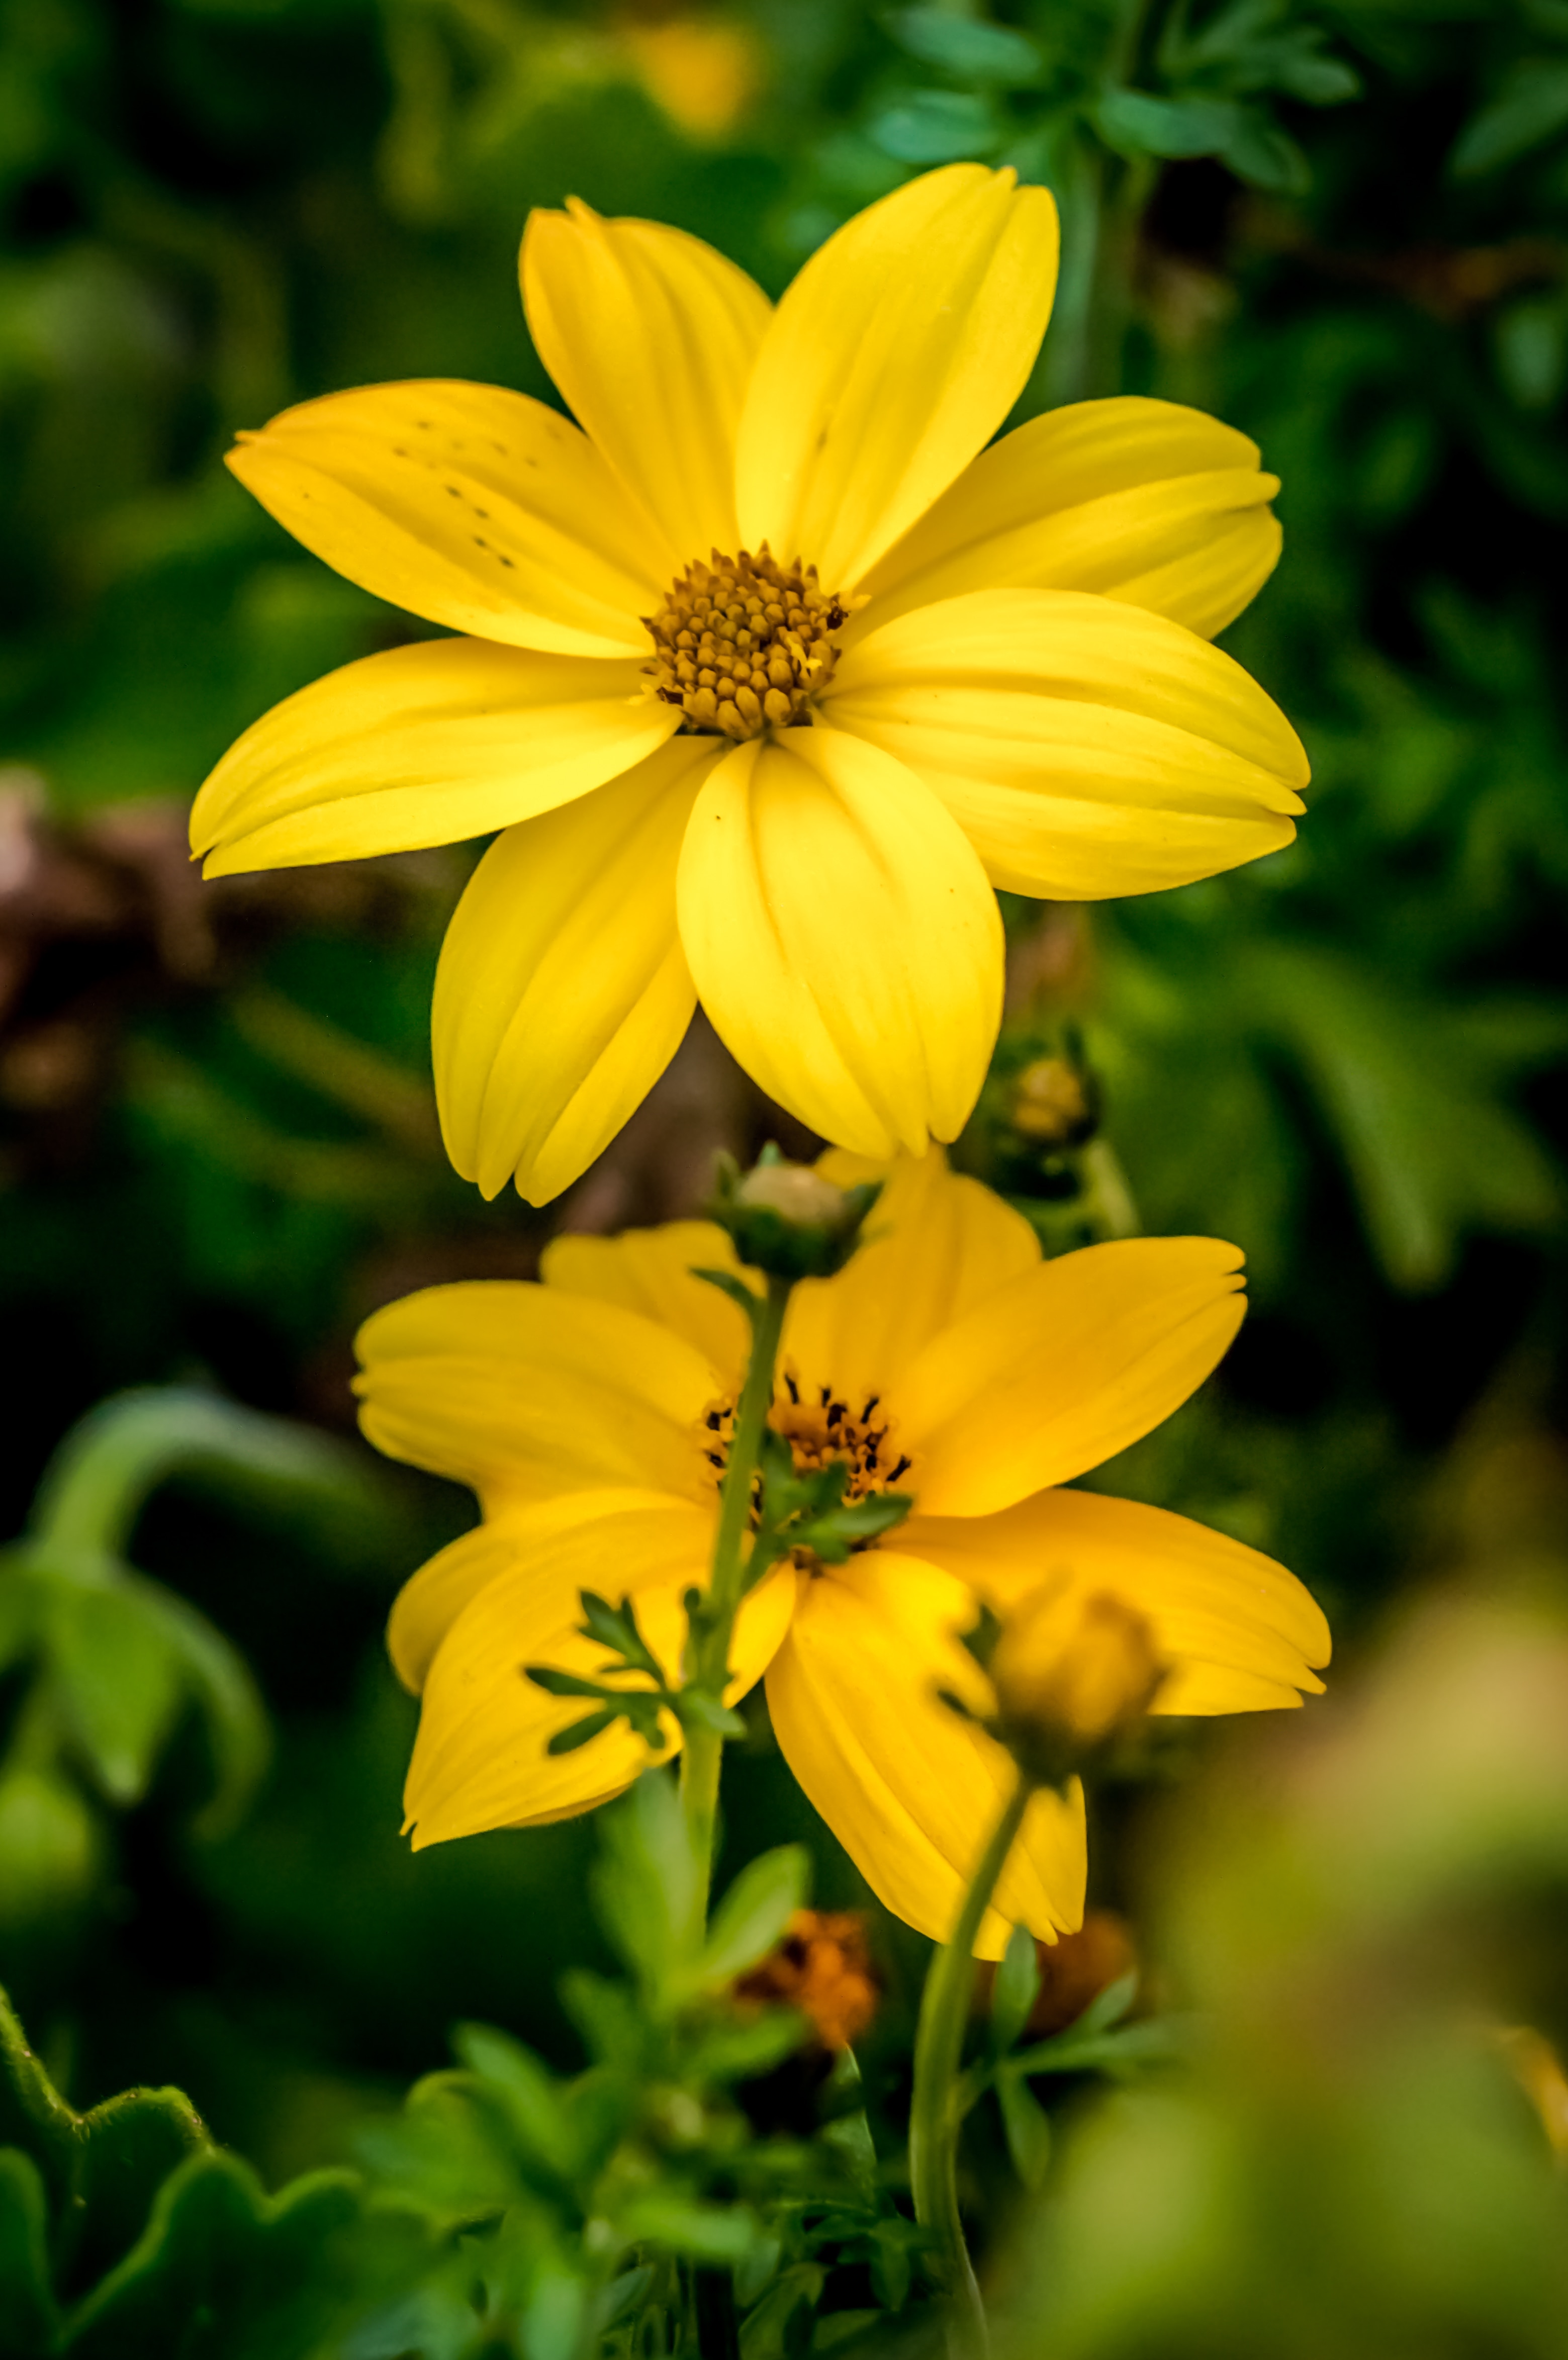 yellow coreopsis in bloom during daytime